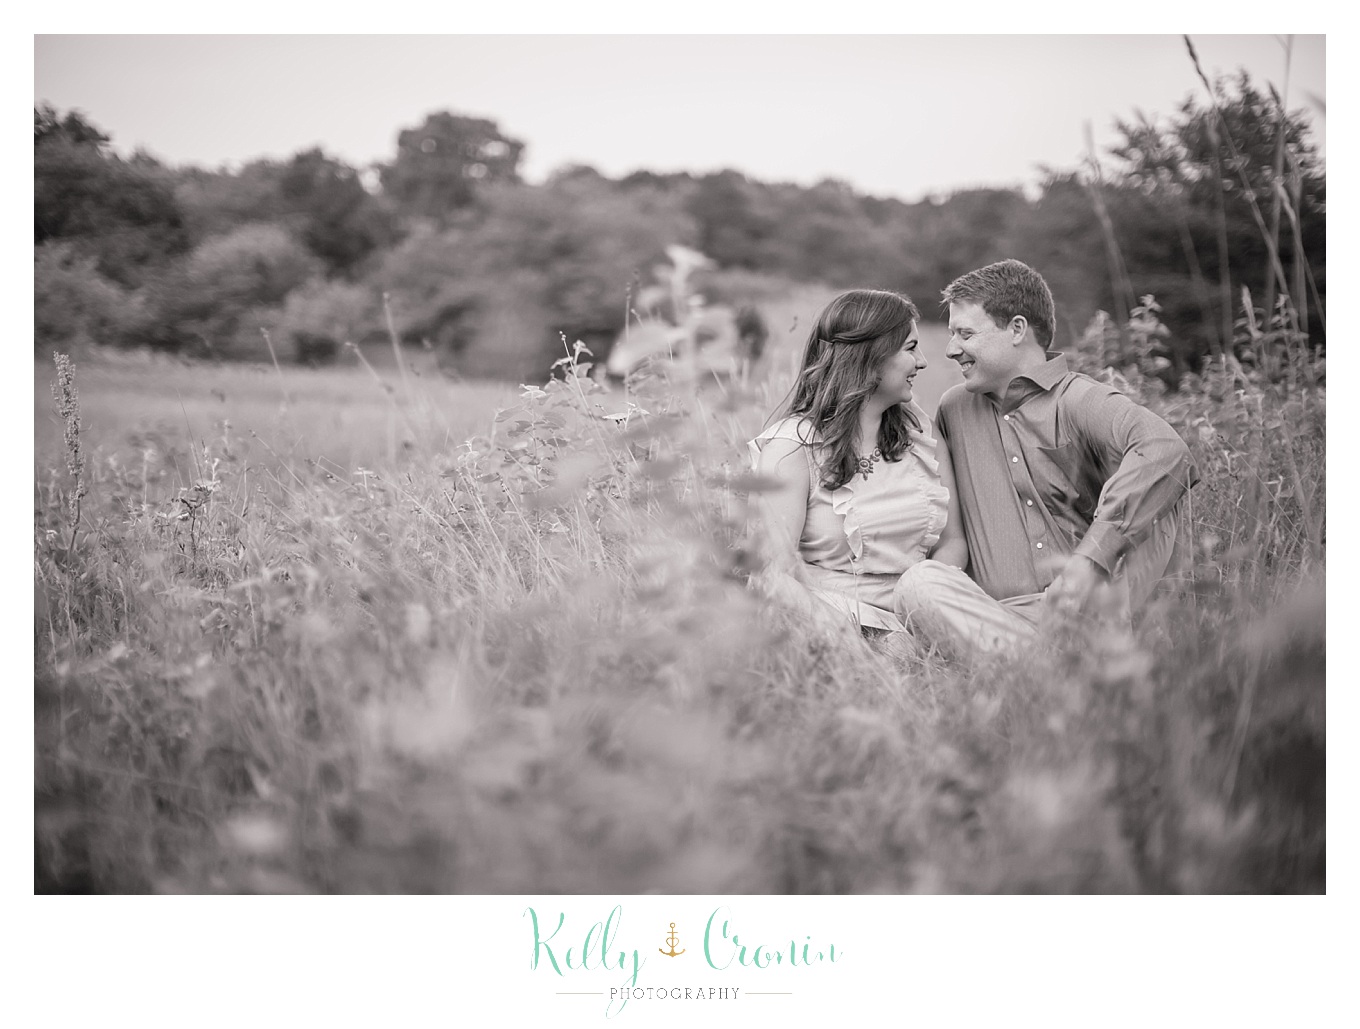 An engaged couple share an intimate moment in Thompson's Field, captured by Kelly Cronin Photography.